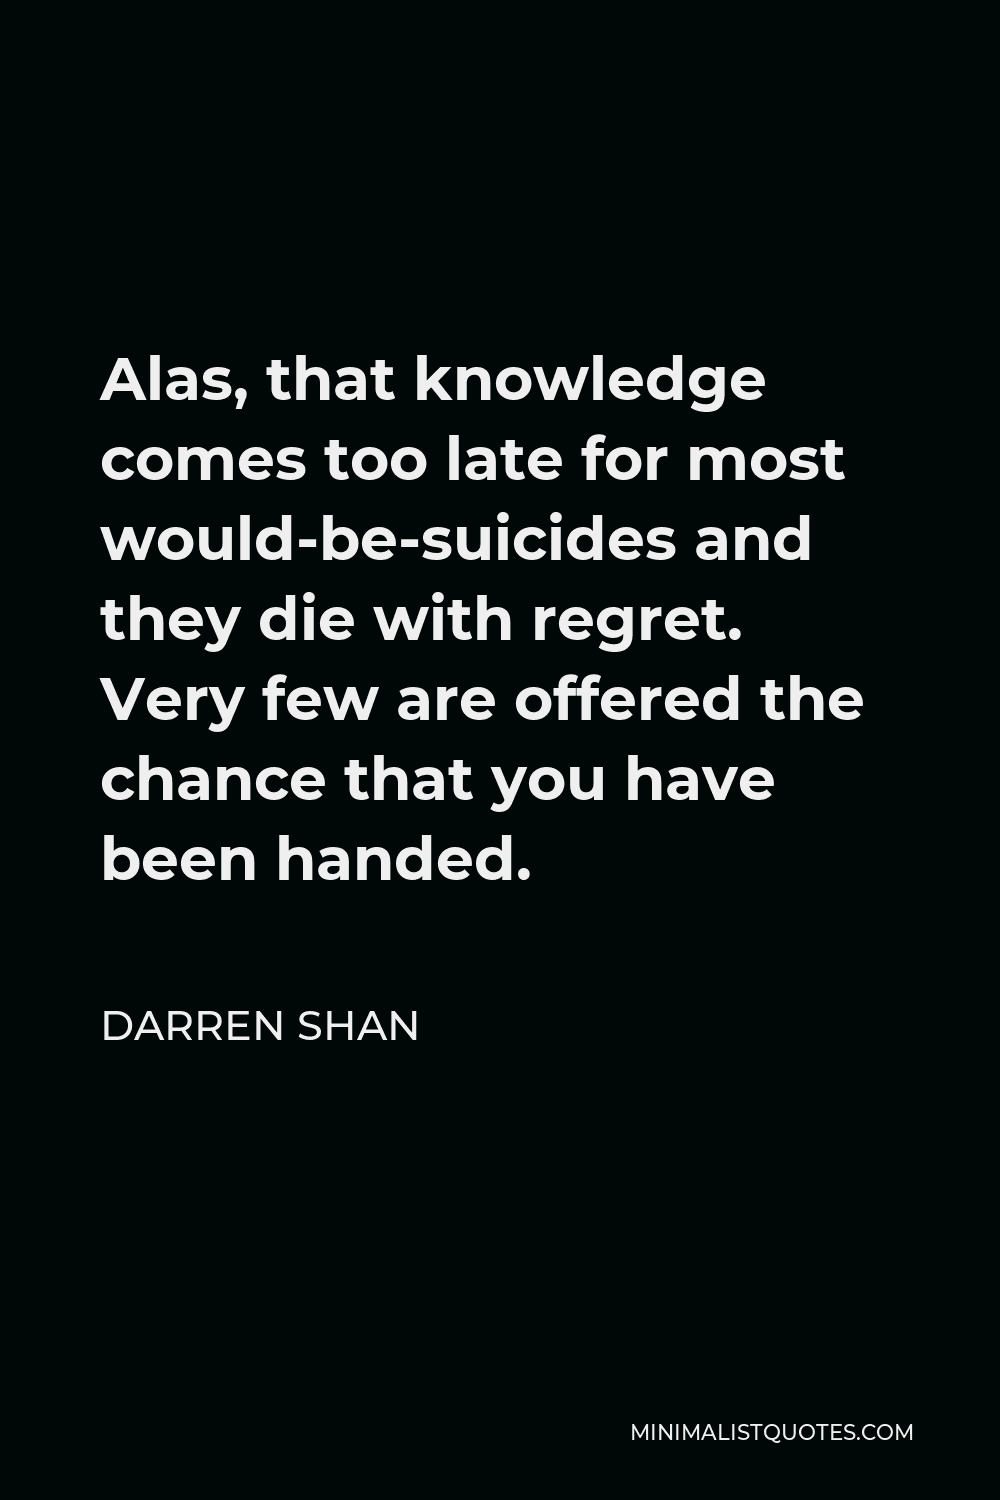 Darren Shan Quote - Alas, that knowledge comes too late for most would-be-suicides and they die with regret. Very few are offered the chance that you have been handed.